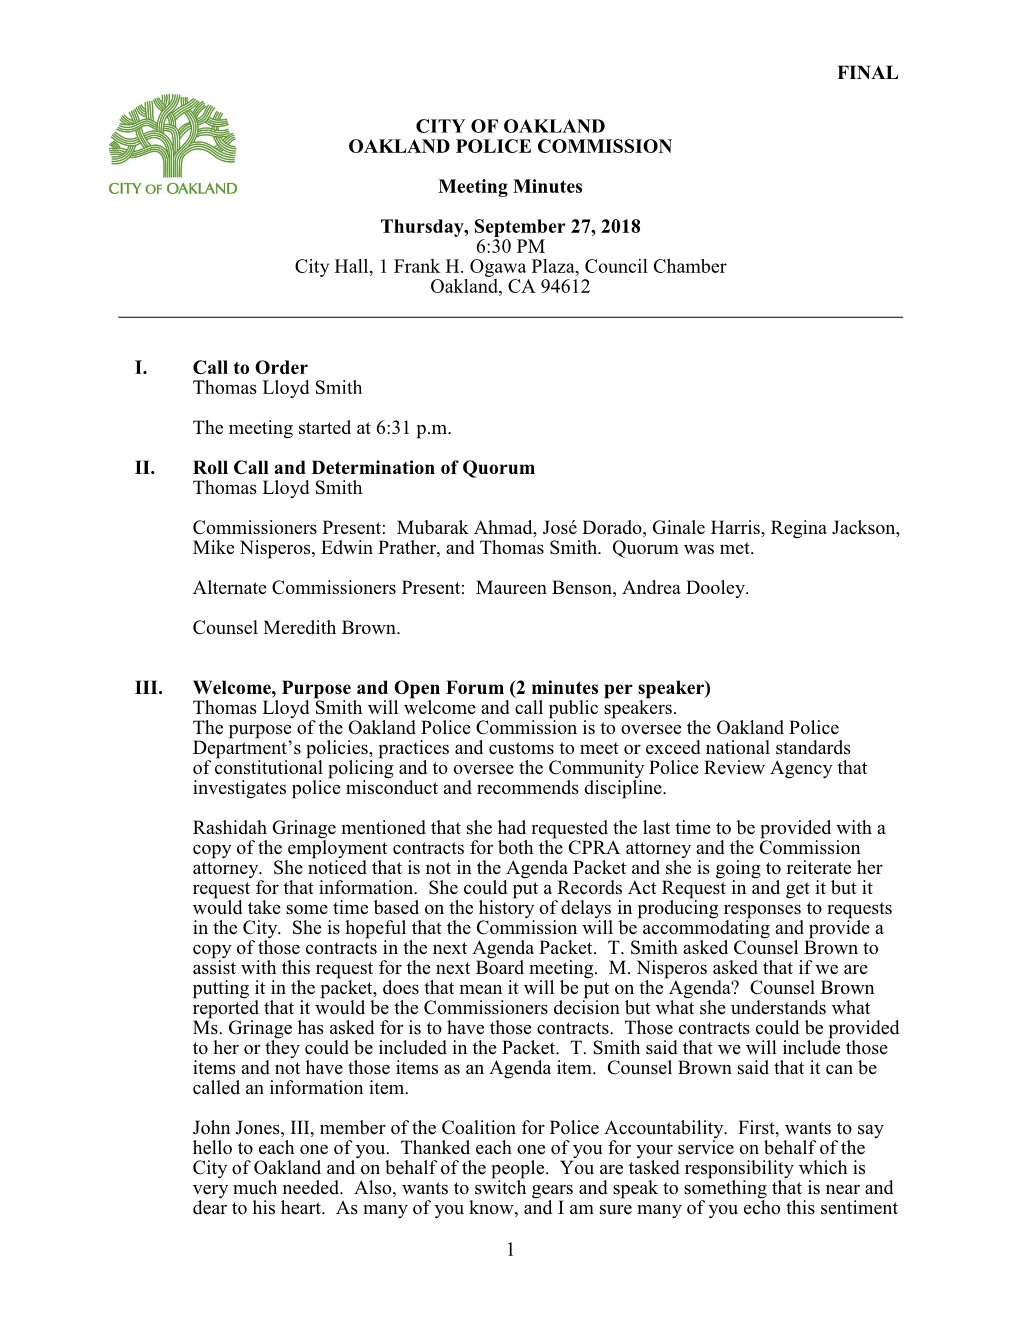 Final 1 \\ City of Oakland Oakland Police Commission